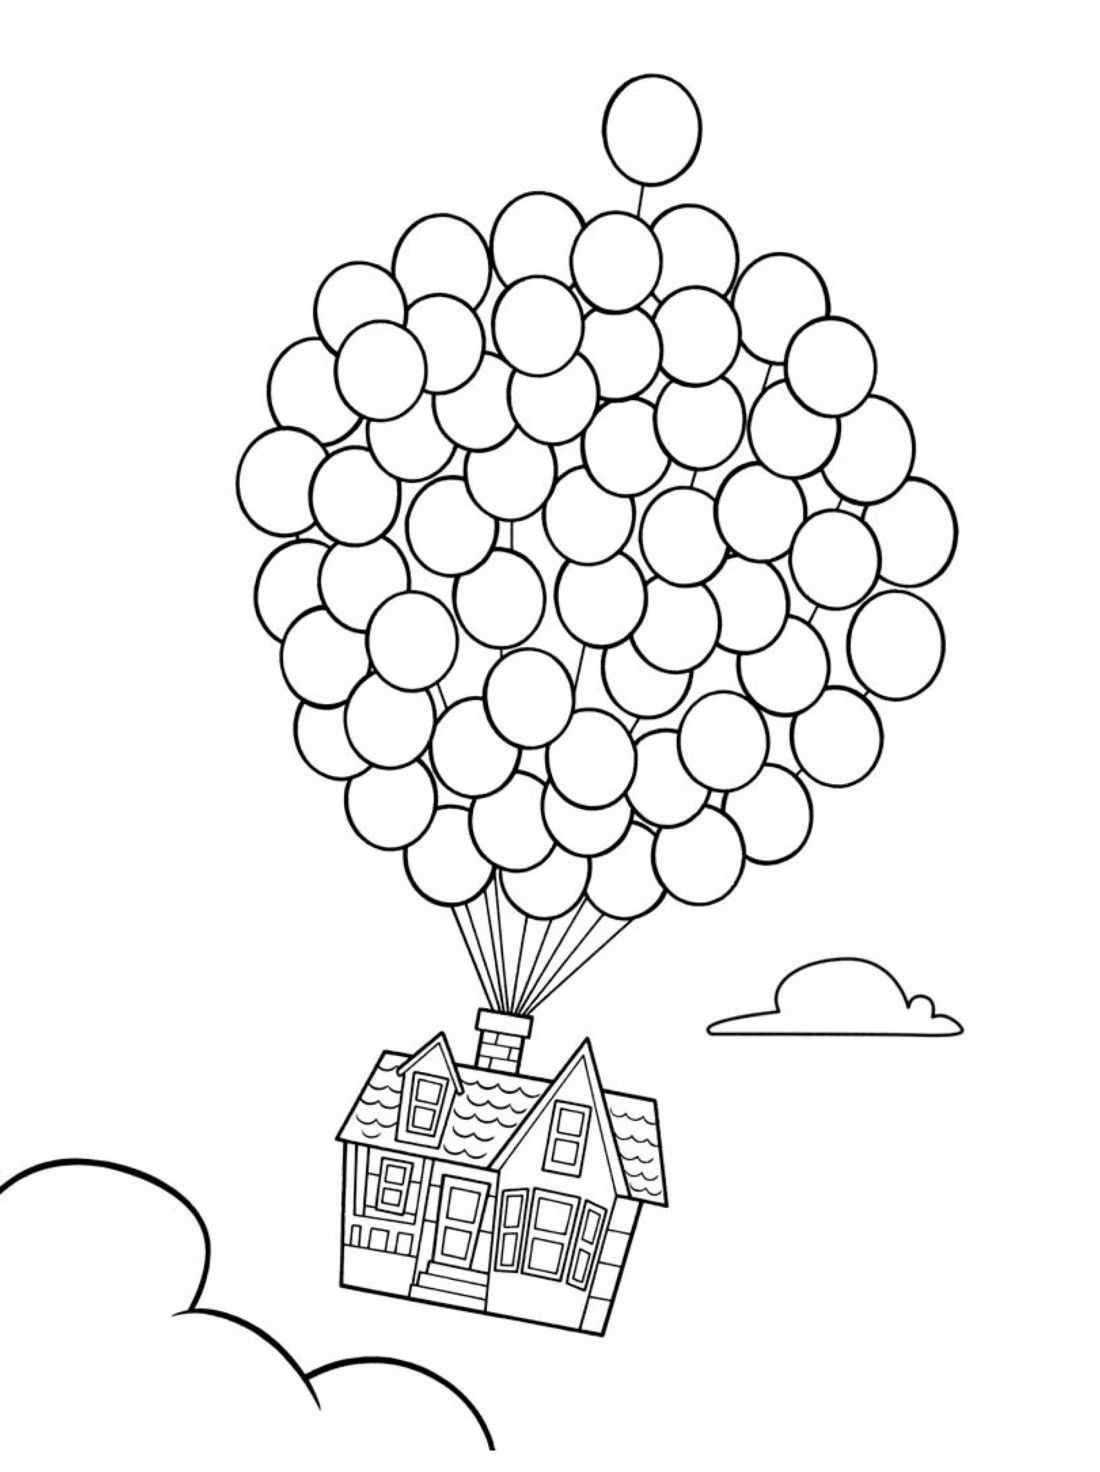 Balloon Coloring Pages   Best Coloring Pages For Kids